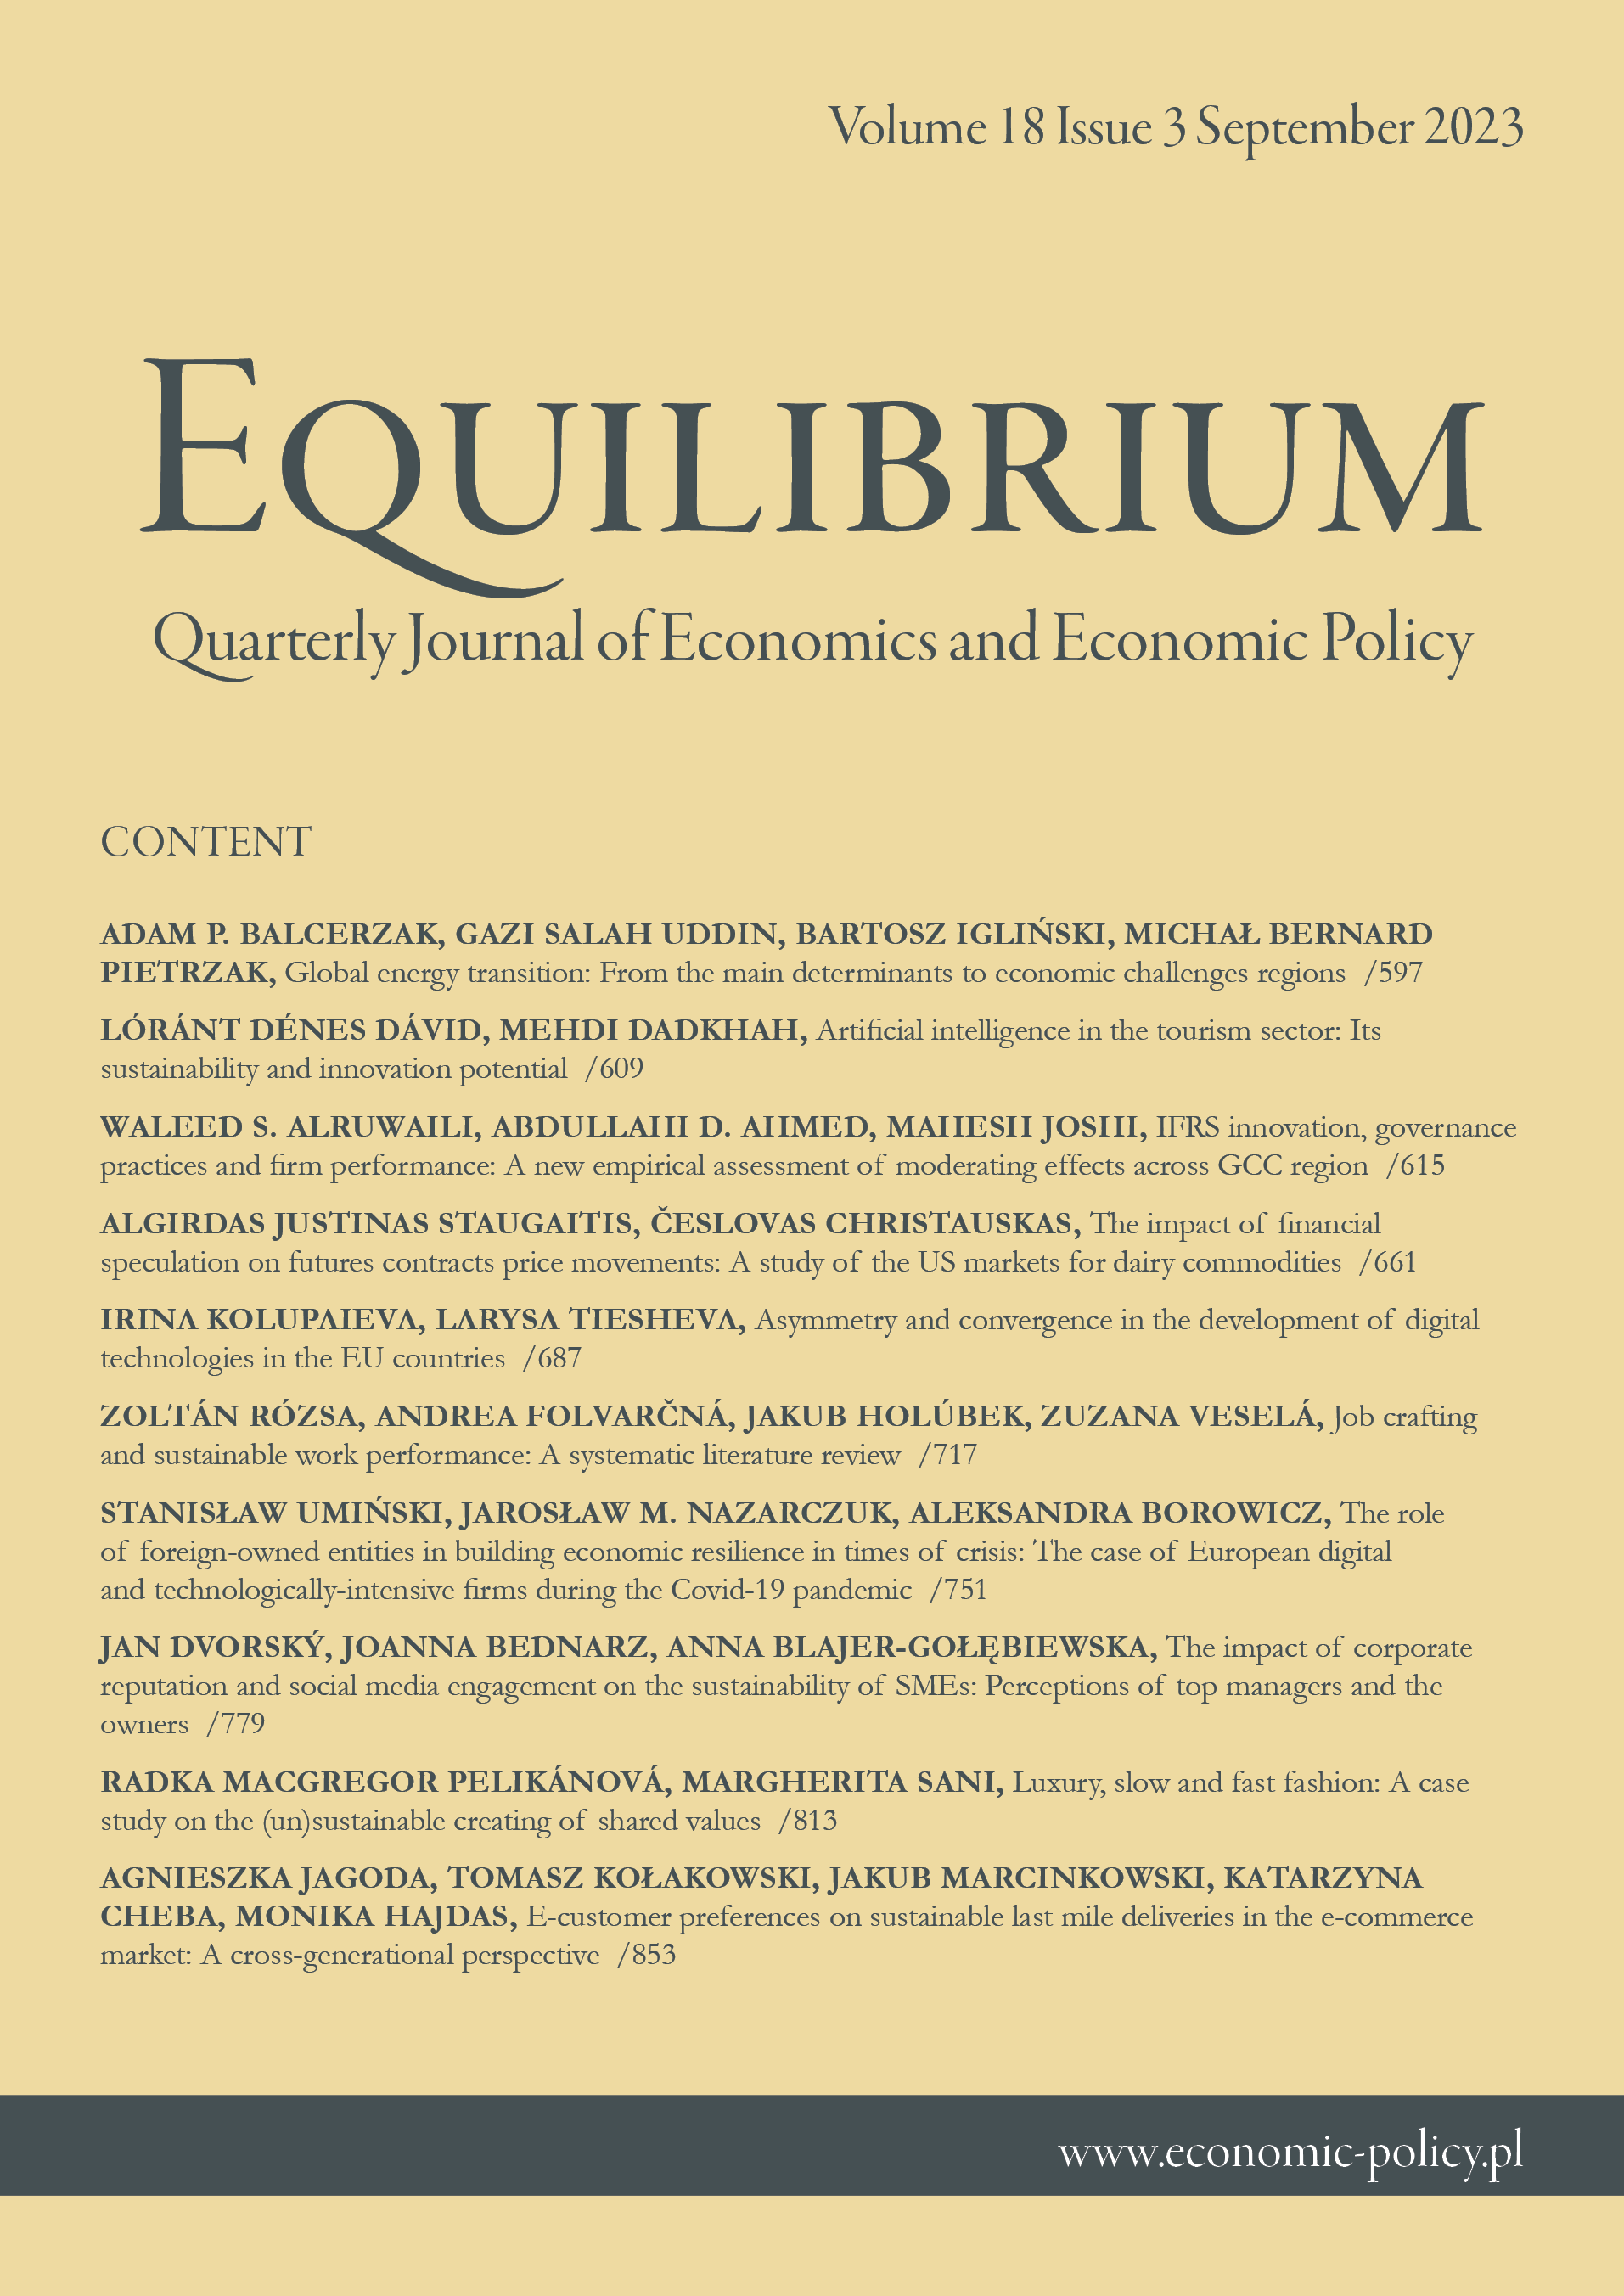 The role of foreign-owned entities in building economic resilience in times of crisis: The case of European digital and technologically-intensive firms during the Covid-19 pandemic Cover Image